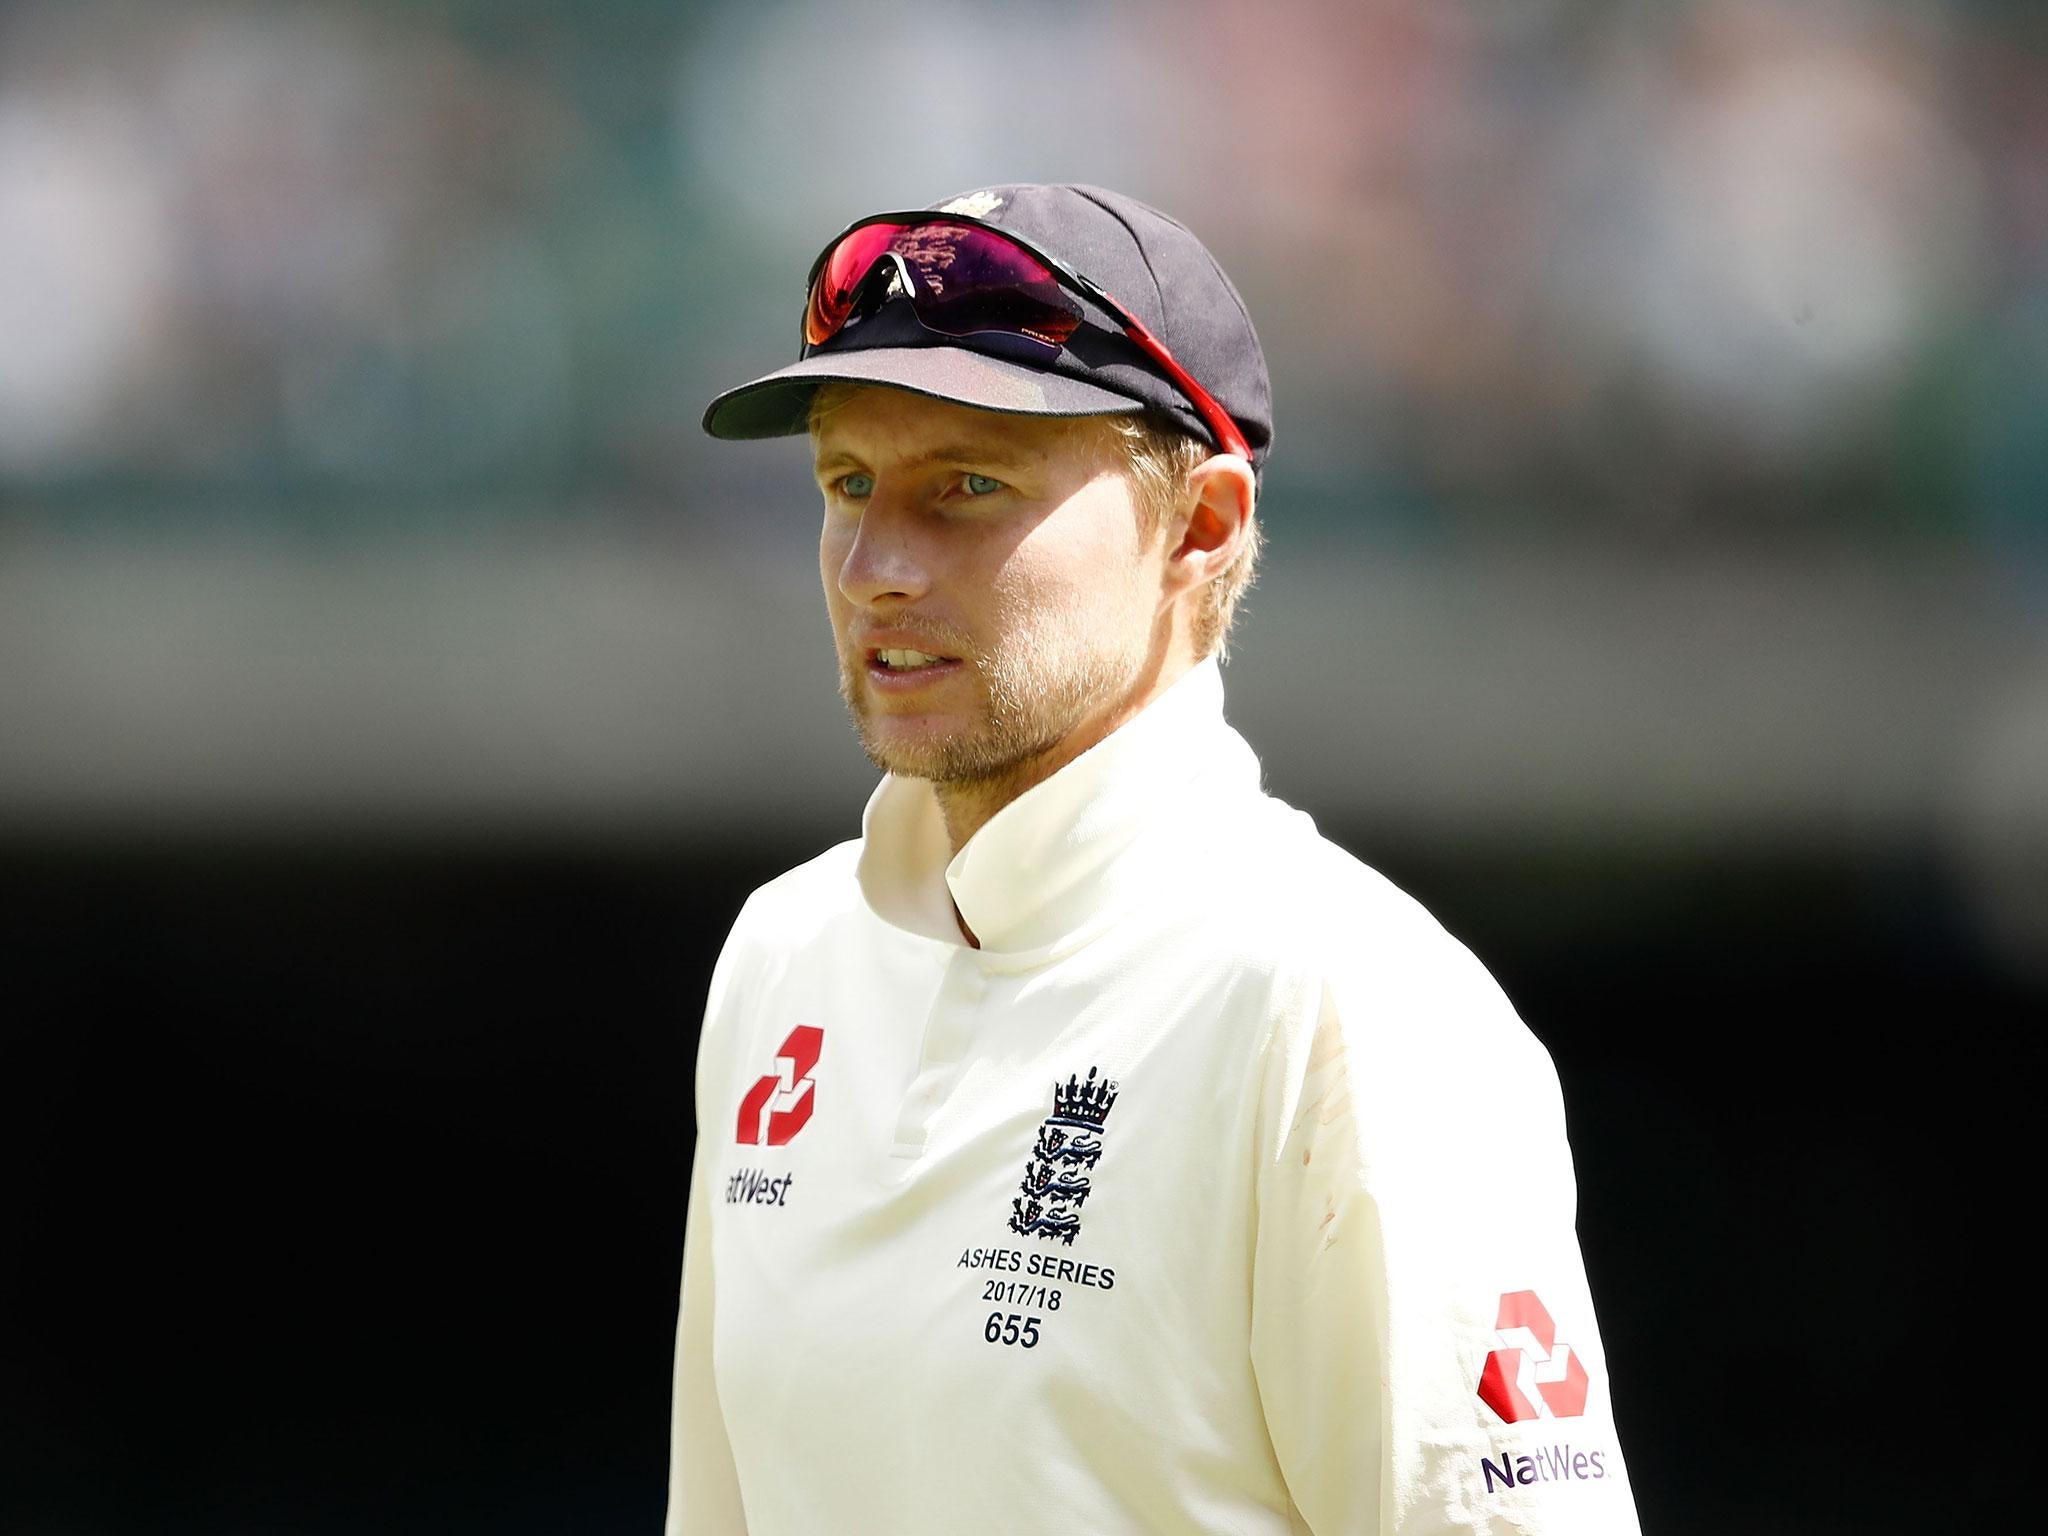 The fifth and final Test can set a solid foundation for Joe Root's side ahead of the 2019 Ashes